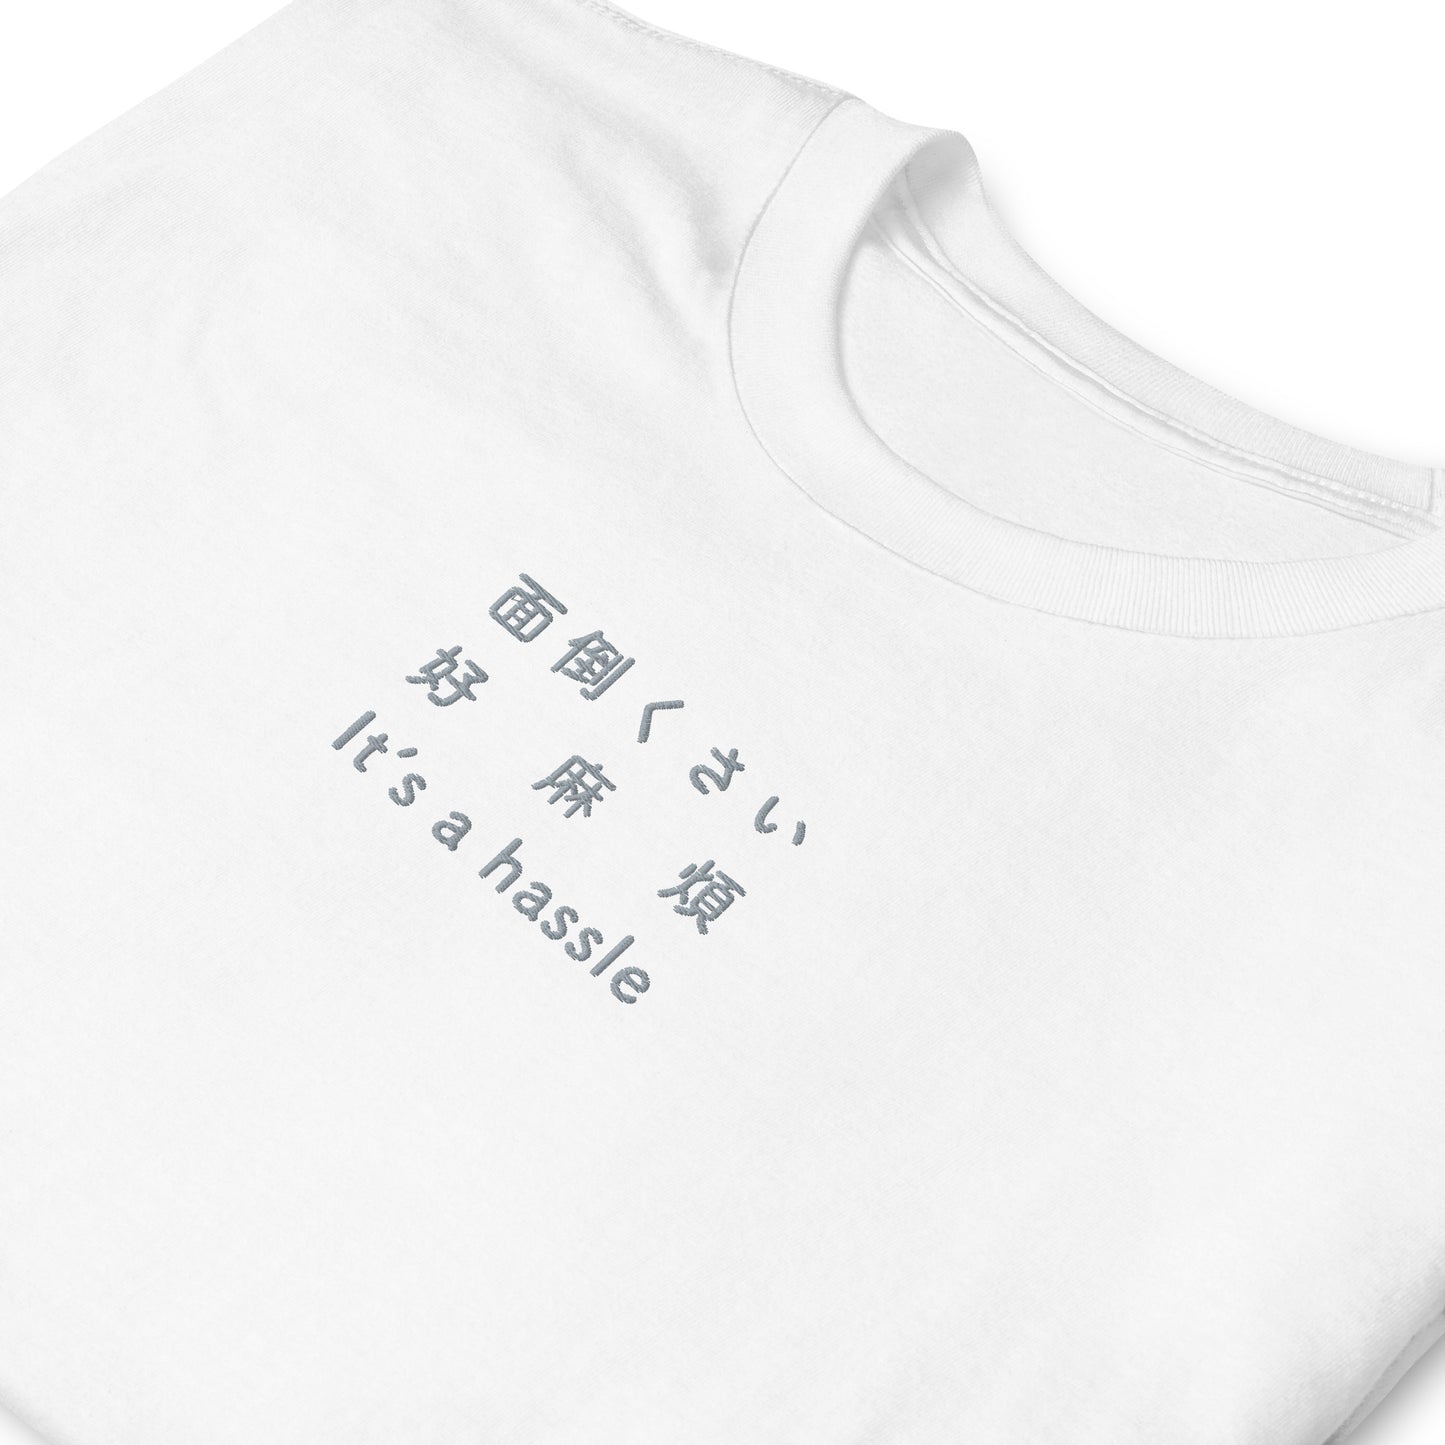 White High Quality Tee - Front Design with an Light GrayEmbroidery "It's a hassle" in Japanese,Chinese and English